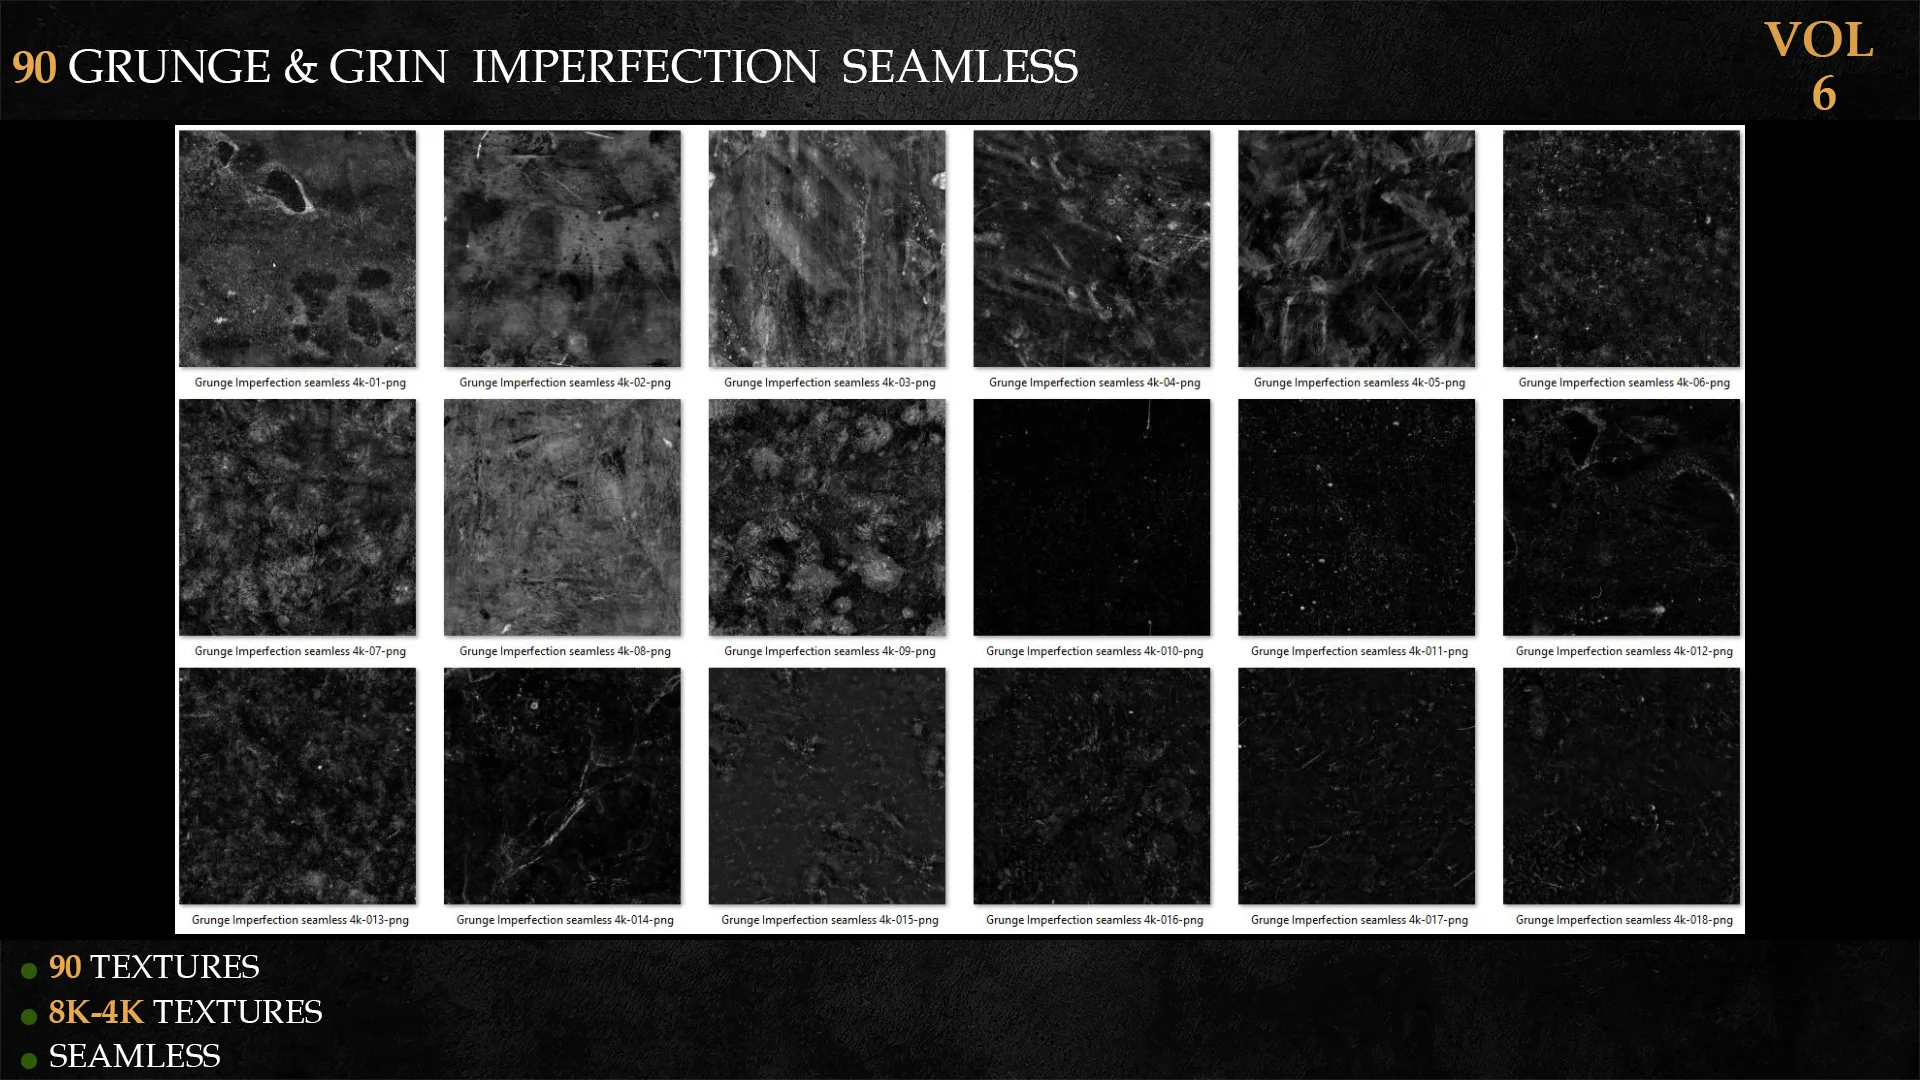 90 GRUNGE & GRIN IMPERFECTION SEAMLESS-vol 6